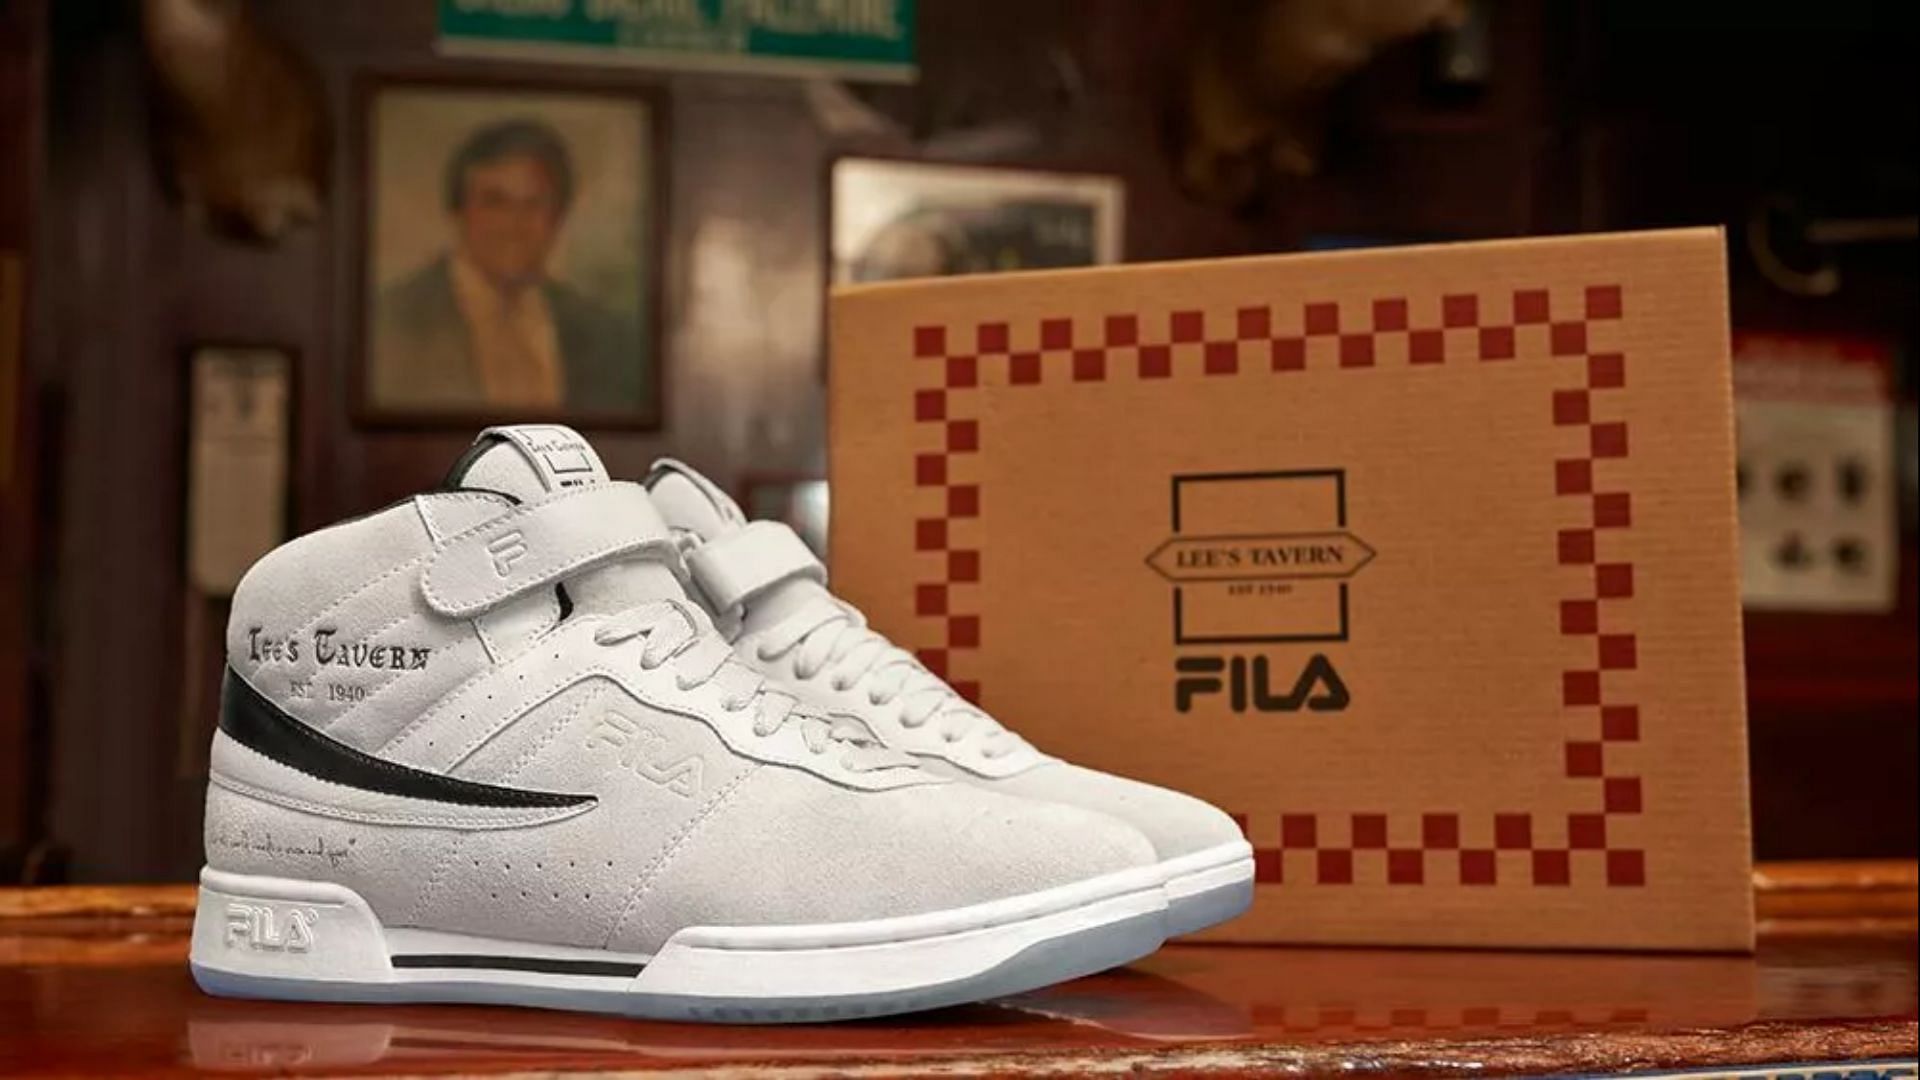 Kudde strelen Regenjas Where to buy the Fila NYC x pizzeria sneaker collection? Price, release  date, and more explored